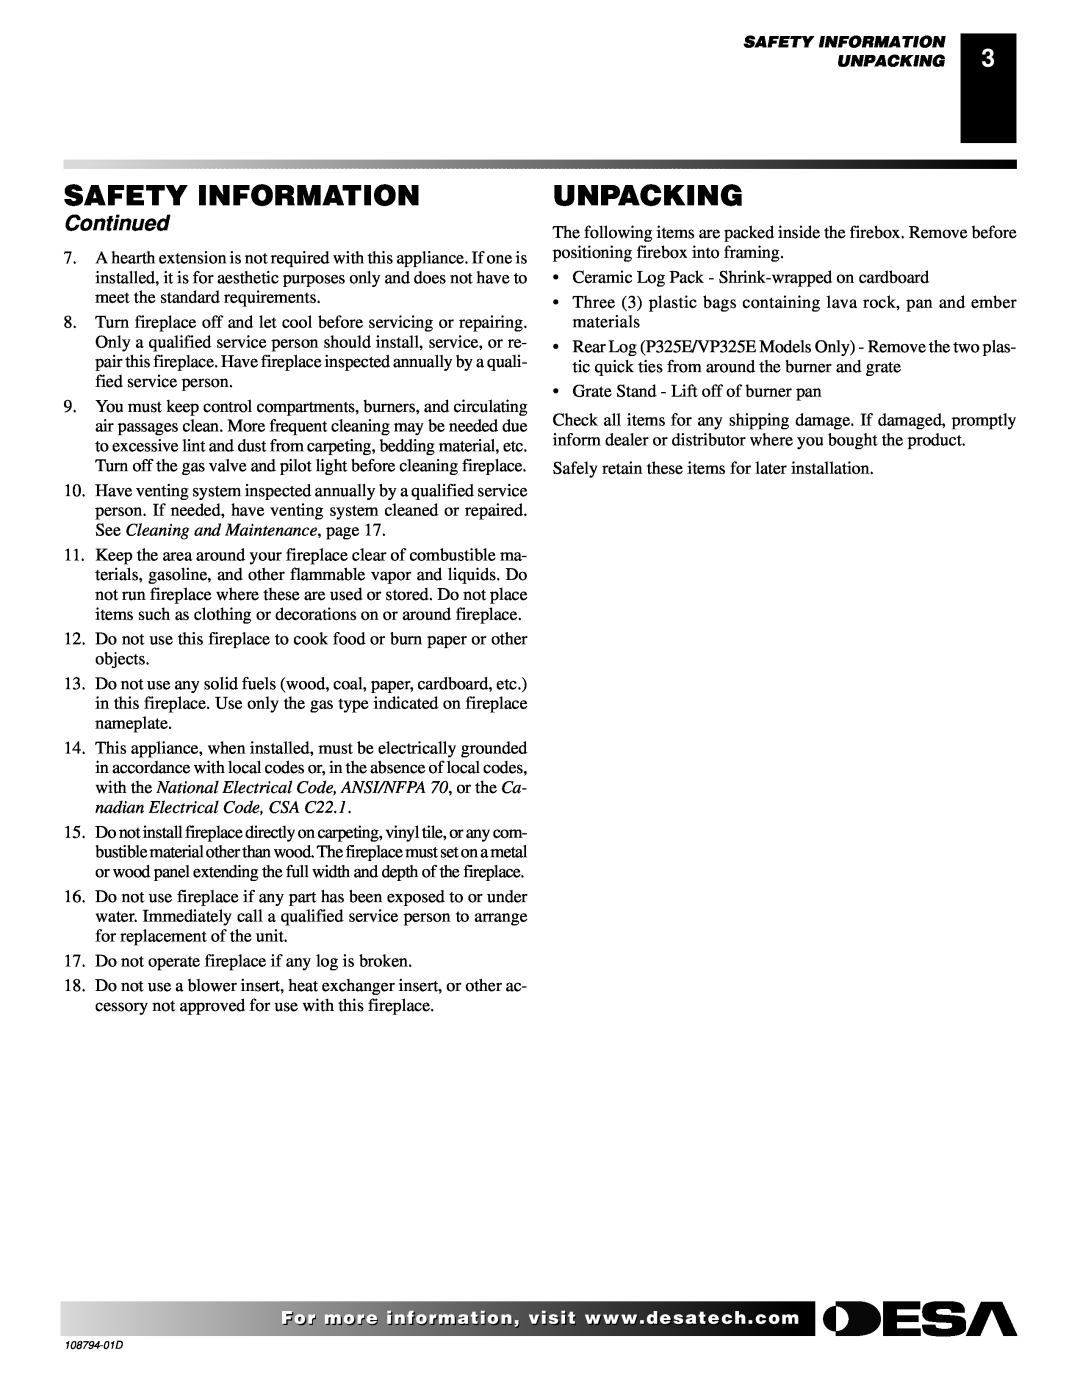 Desa VP325E(B) installation manual Unpacking, Continued, Safety Information 